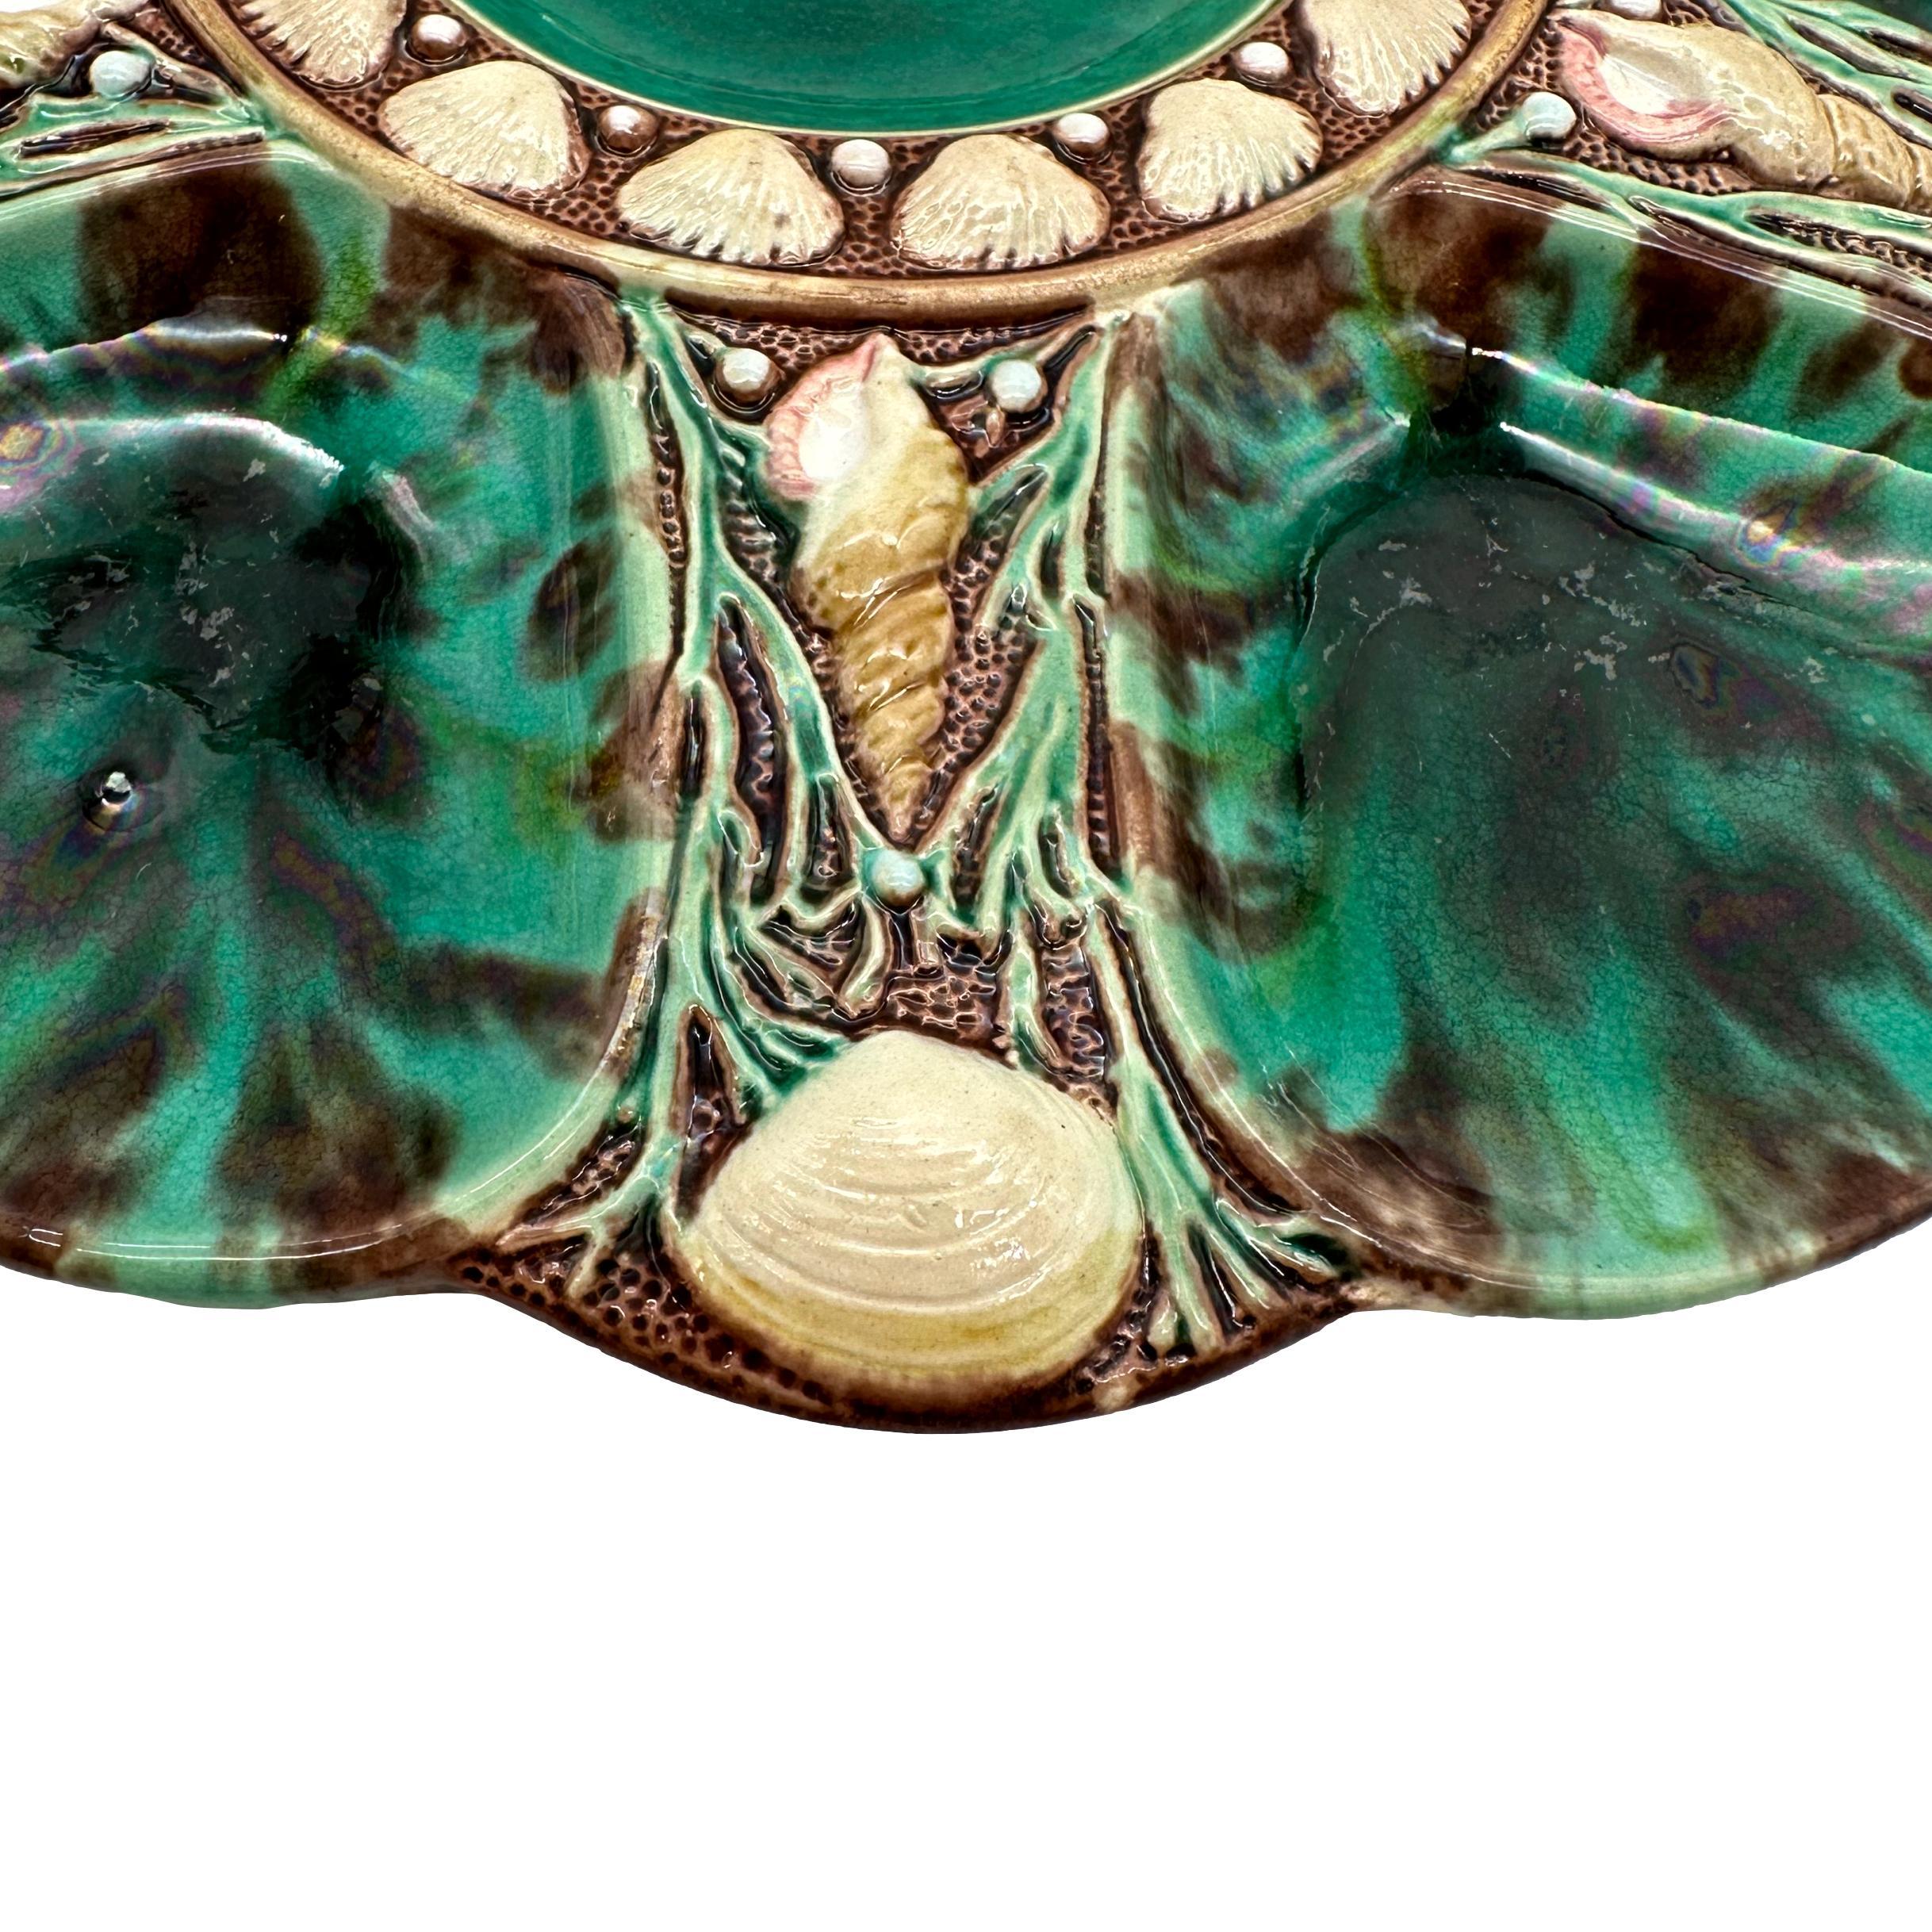 Minton Majolica Oyster Plate, Mottled Leopard Spots, English, Dated 1871 In Good Condition For Sale In Banner Elk, NC